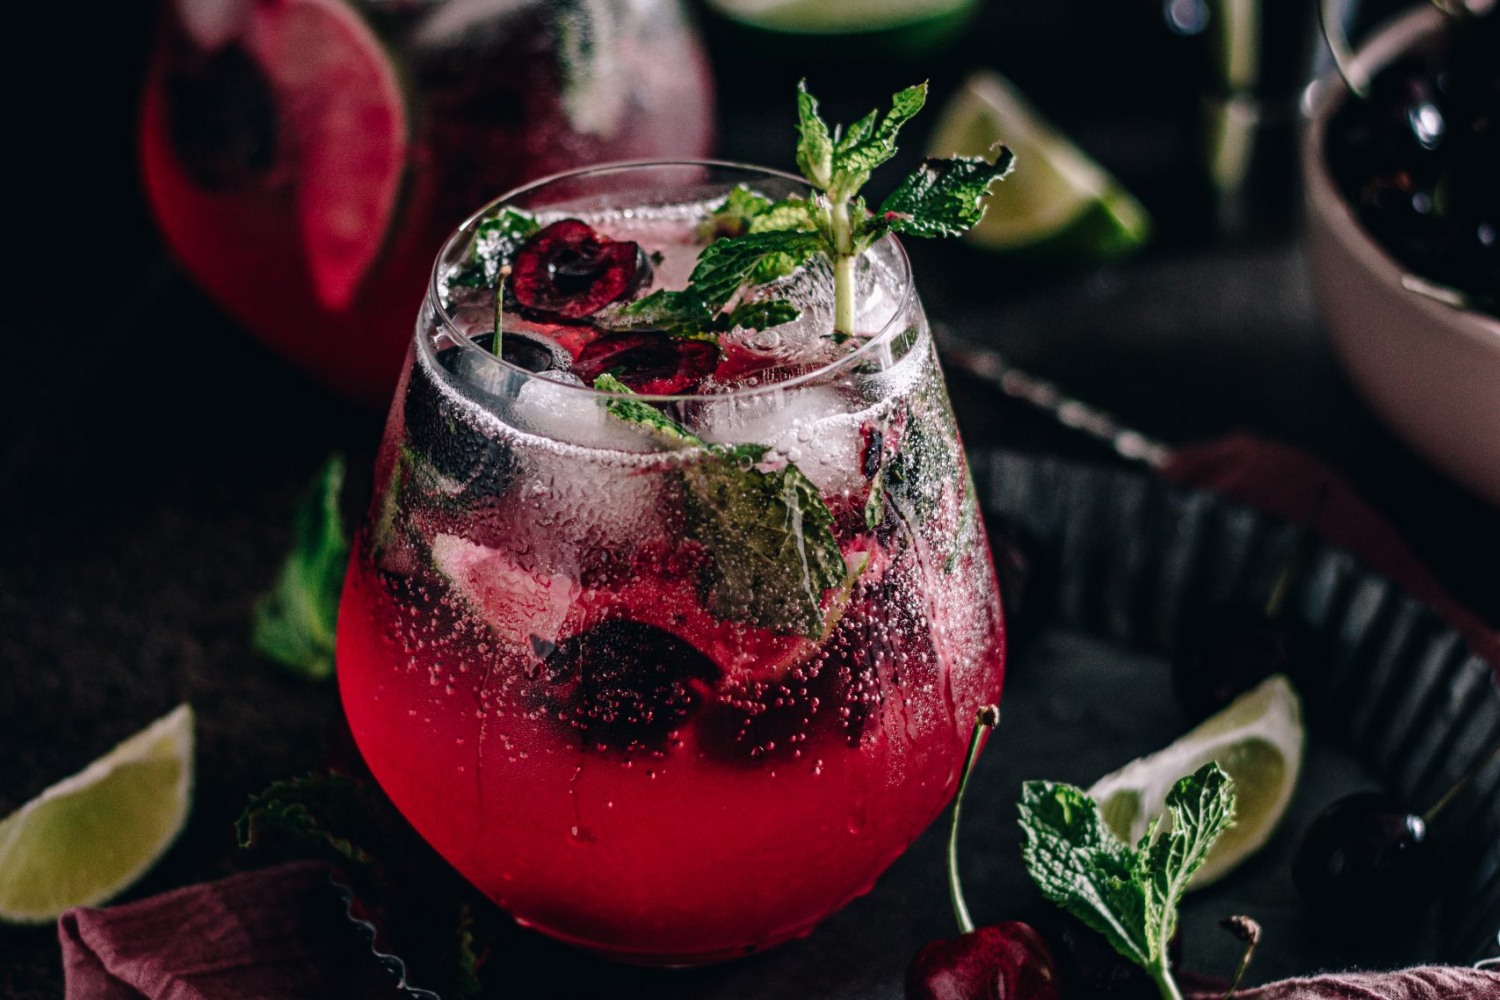 Cherry mojito garnished with fresh mint and surrounded by limes